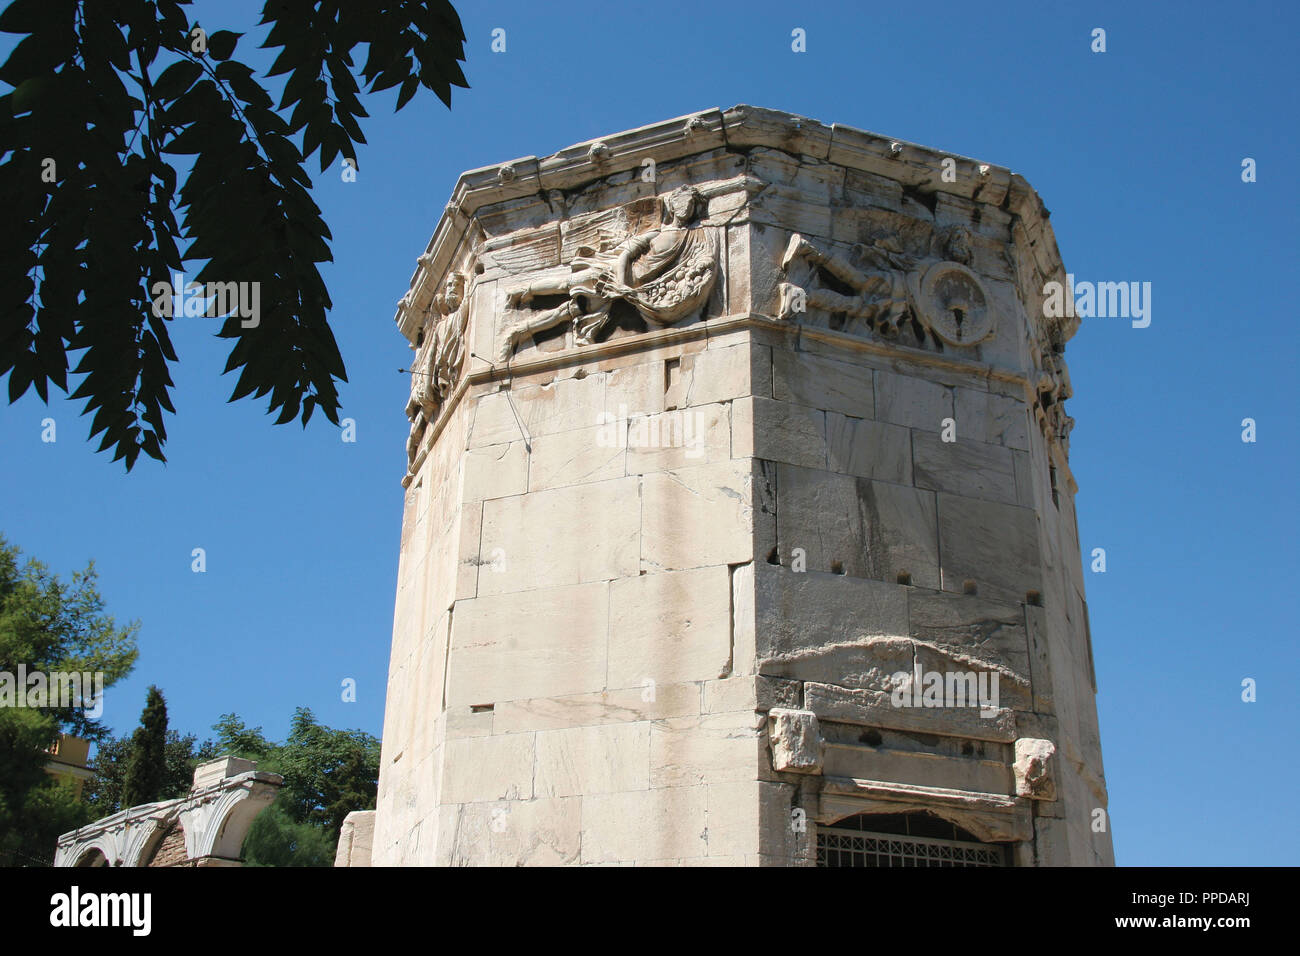 Roman Art. Tower of the Winds (Horologion). Octogonal pentelic marble clocktower on the Roman Agora. I was supposedly built by Andronicus of Cyrrhus Around 50 BC. Athens. Central Greece. Attica. Europe. Stock Photo